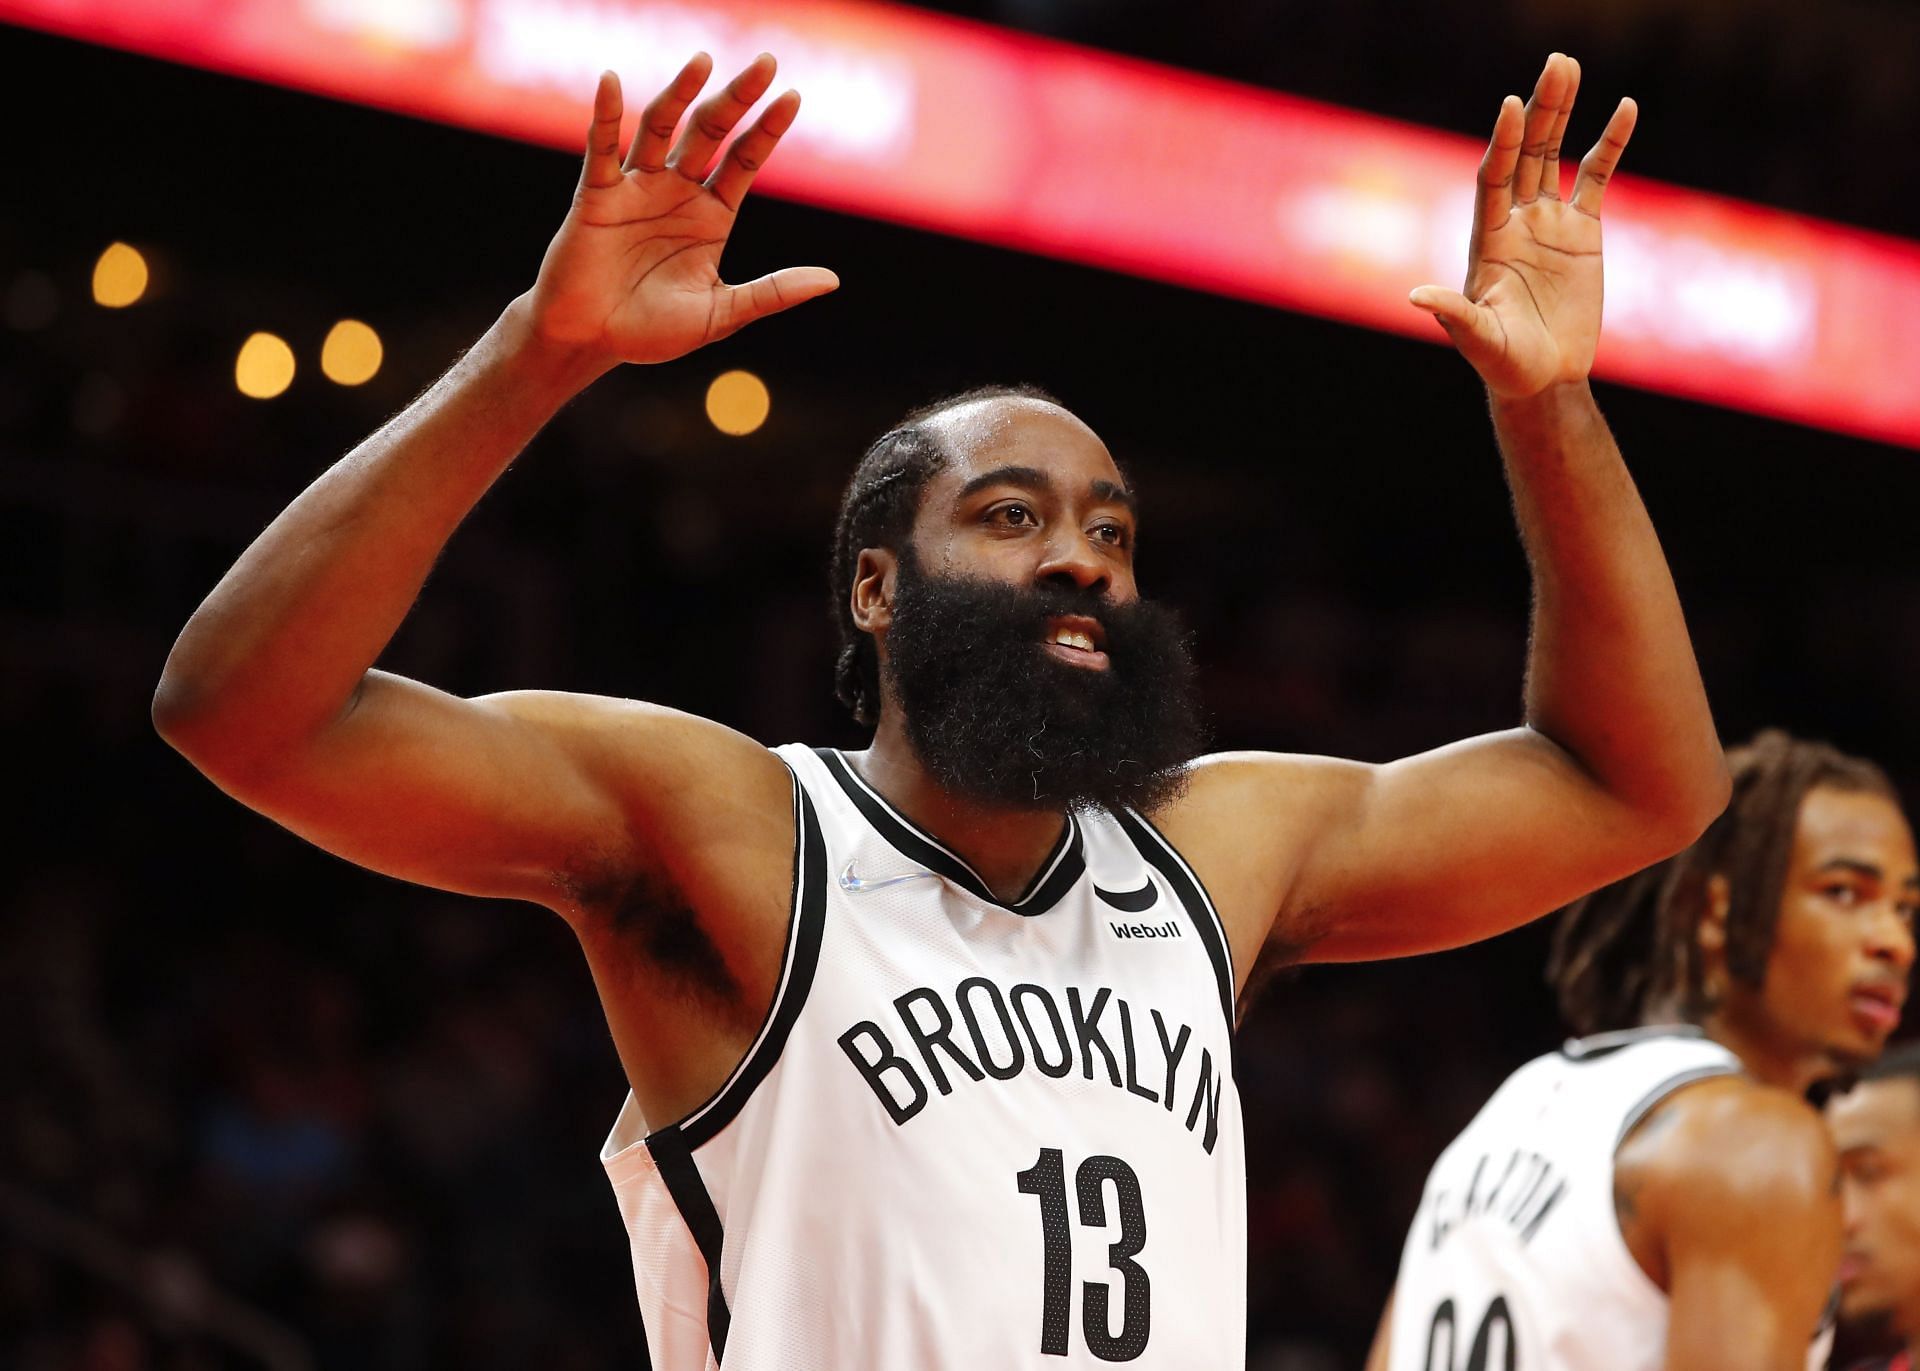 James Harden put up 20 points and 11 assists in a winning effort for the Brooklyn Nets on Friday night